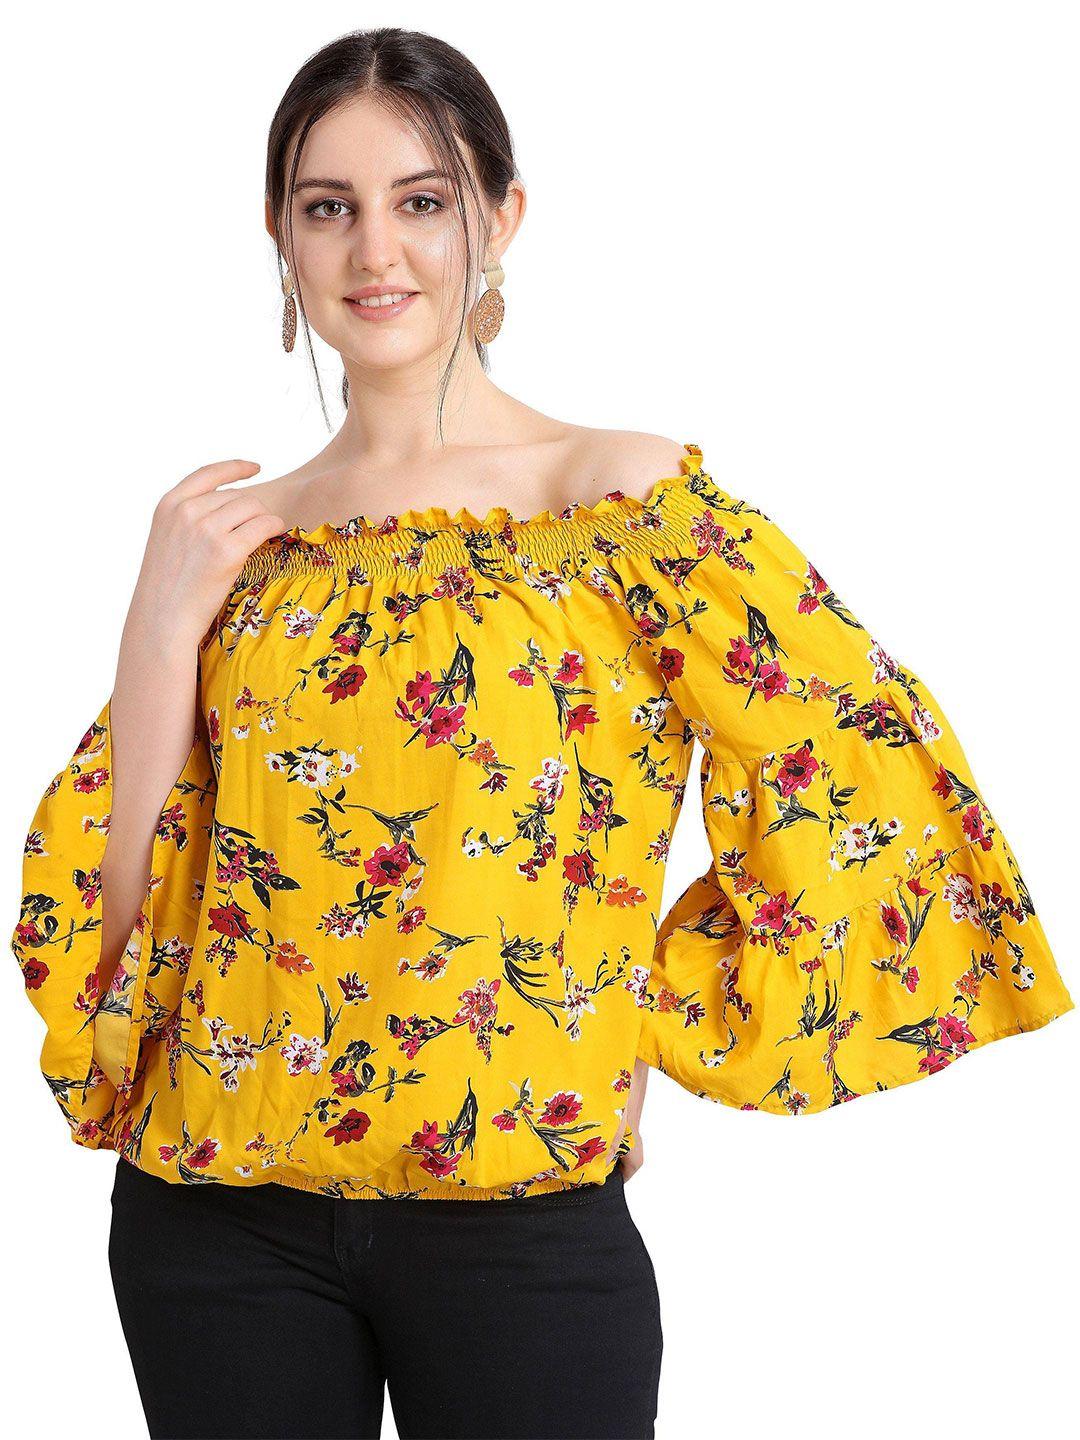 oomph!-yellow-floral-printed-off-shoulder-flared-sleeve-smocked-bardot-top